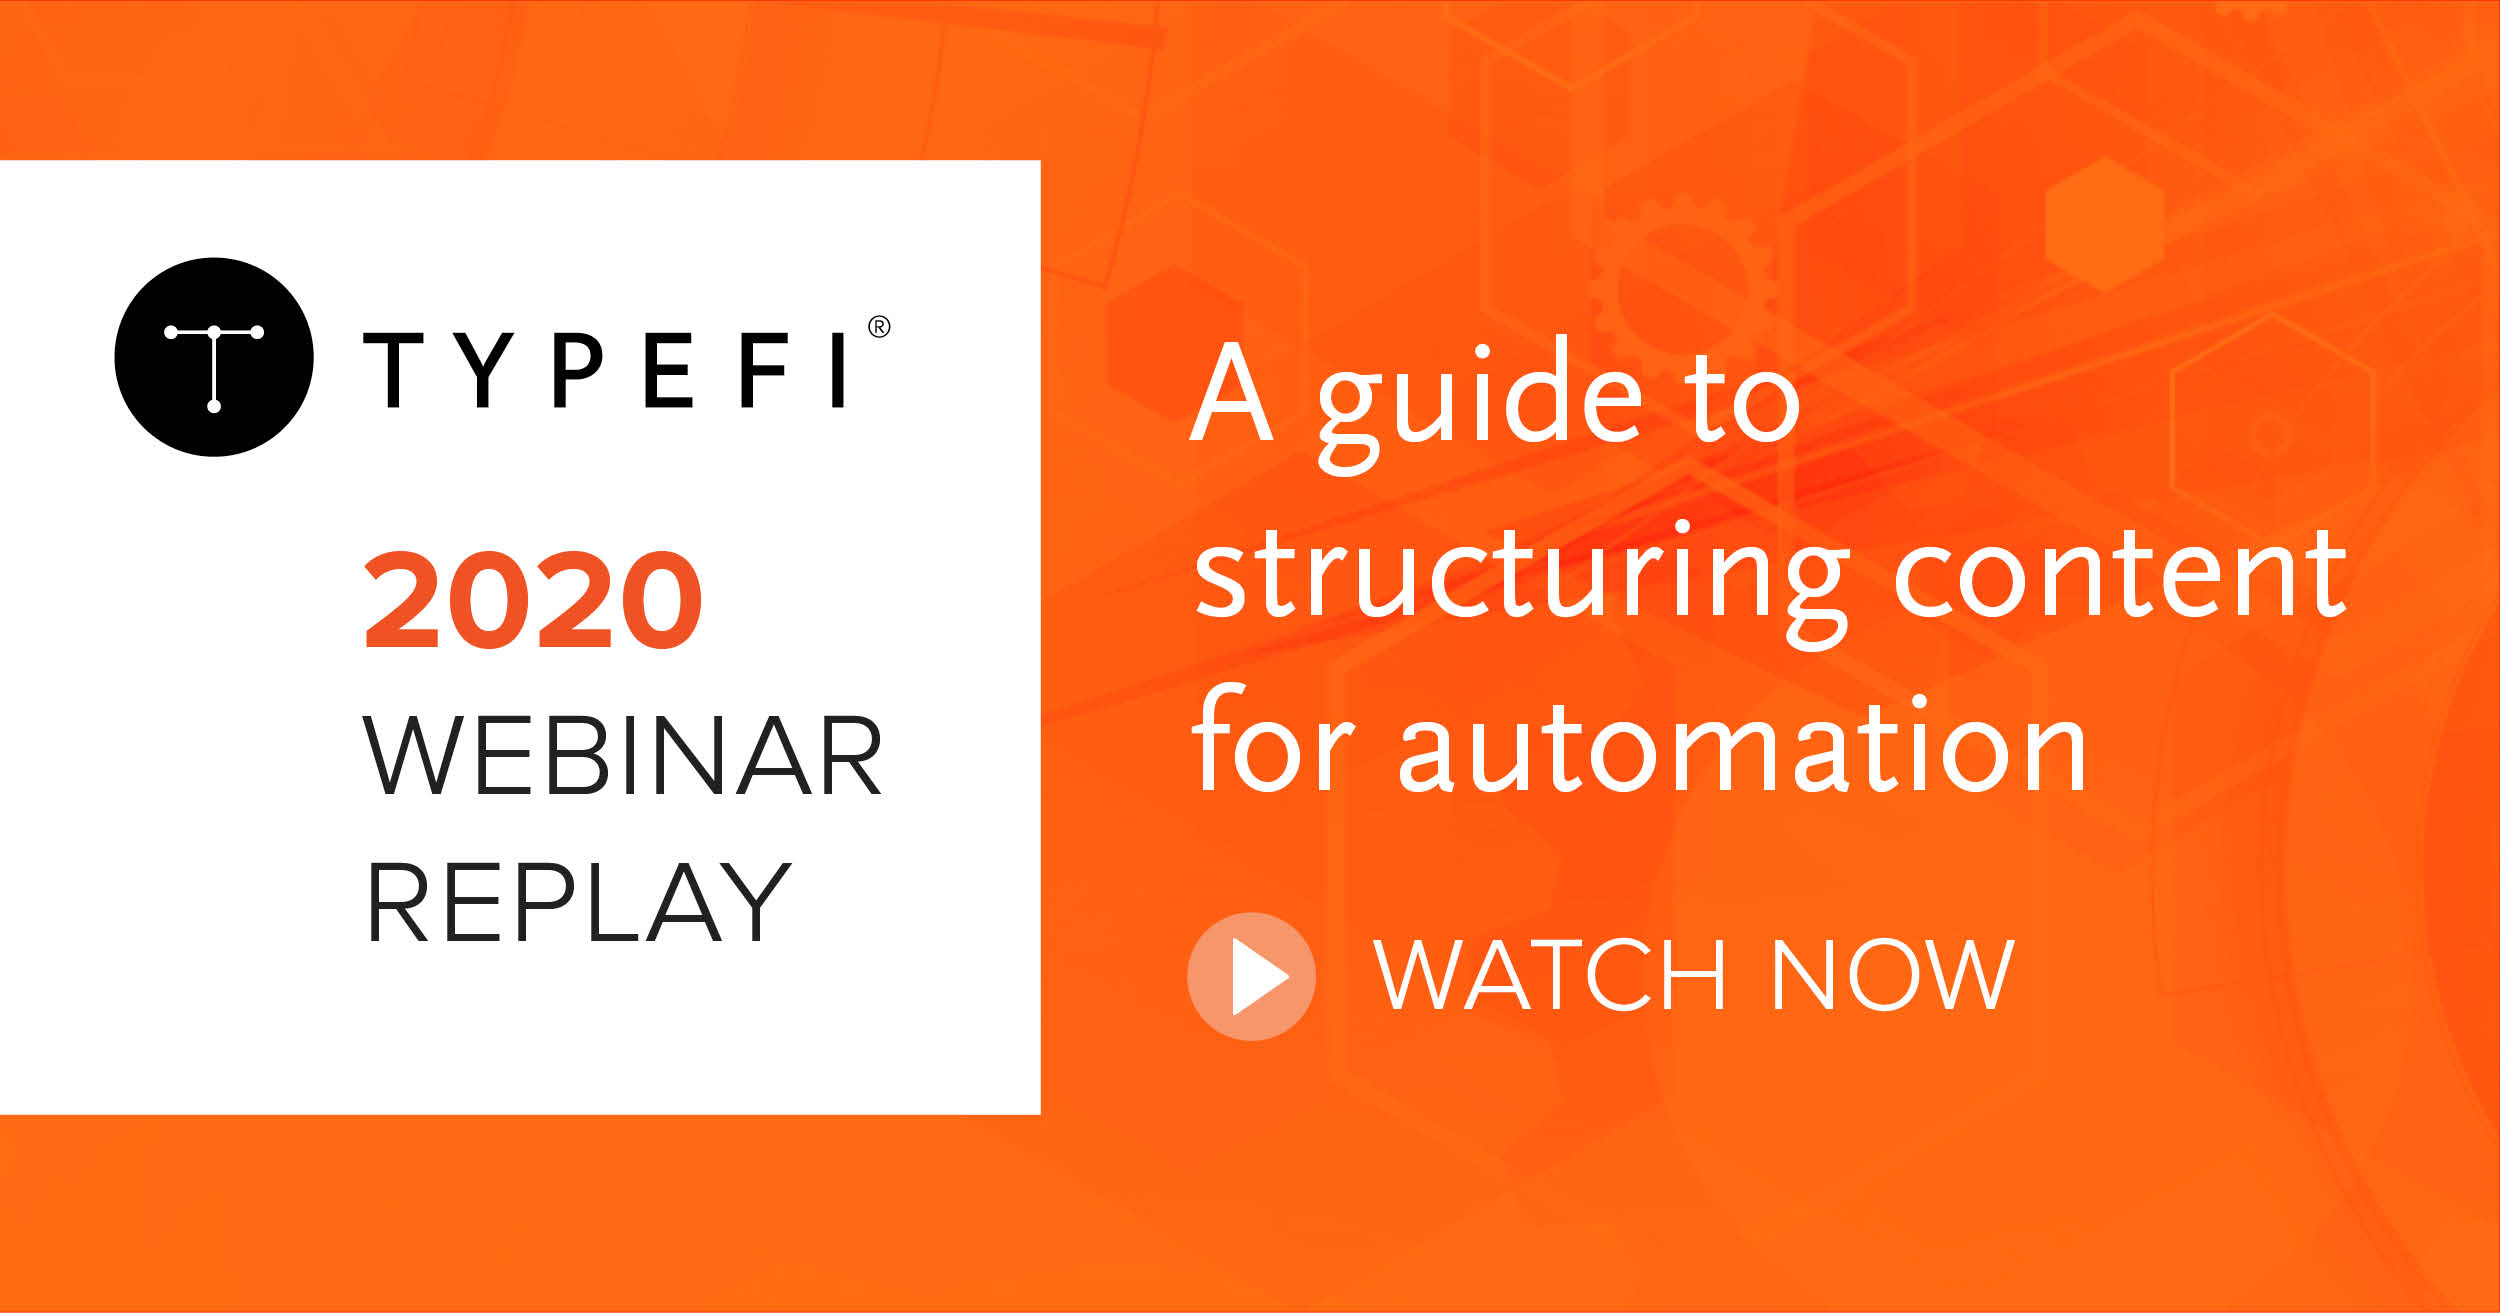 A promotional graphic for the webinar 'A guide to structuring content for automation'